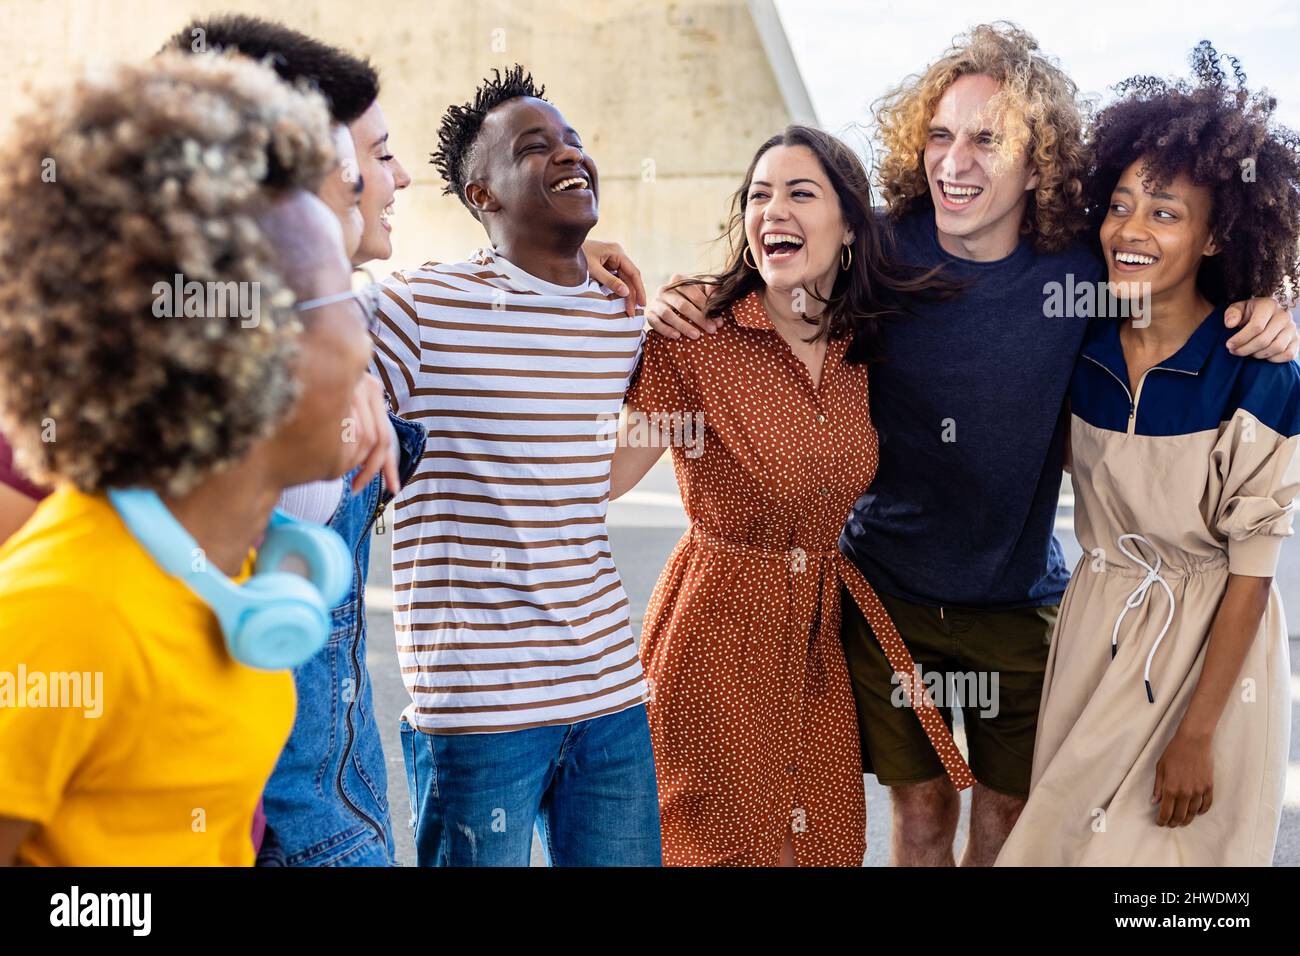 Multi-ethnic young friends laughing together outdoors Stock Photo